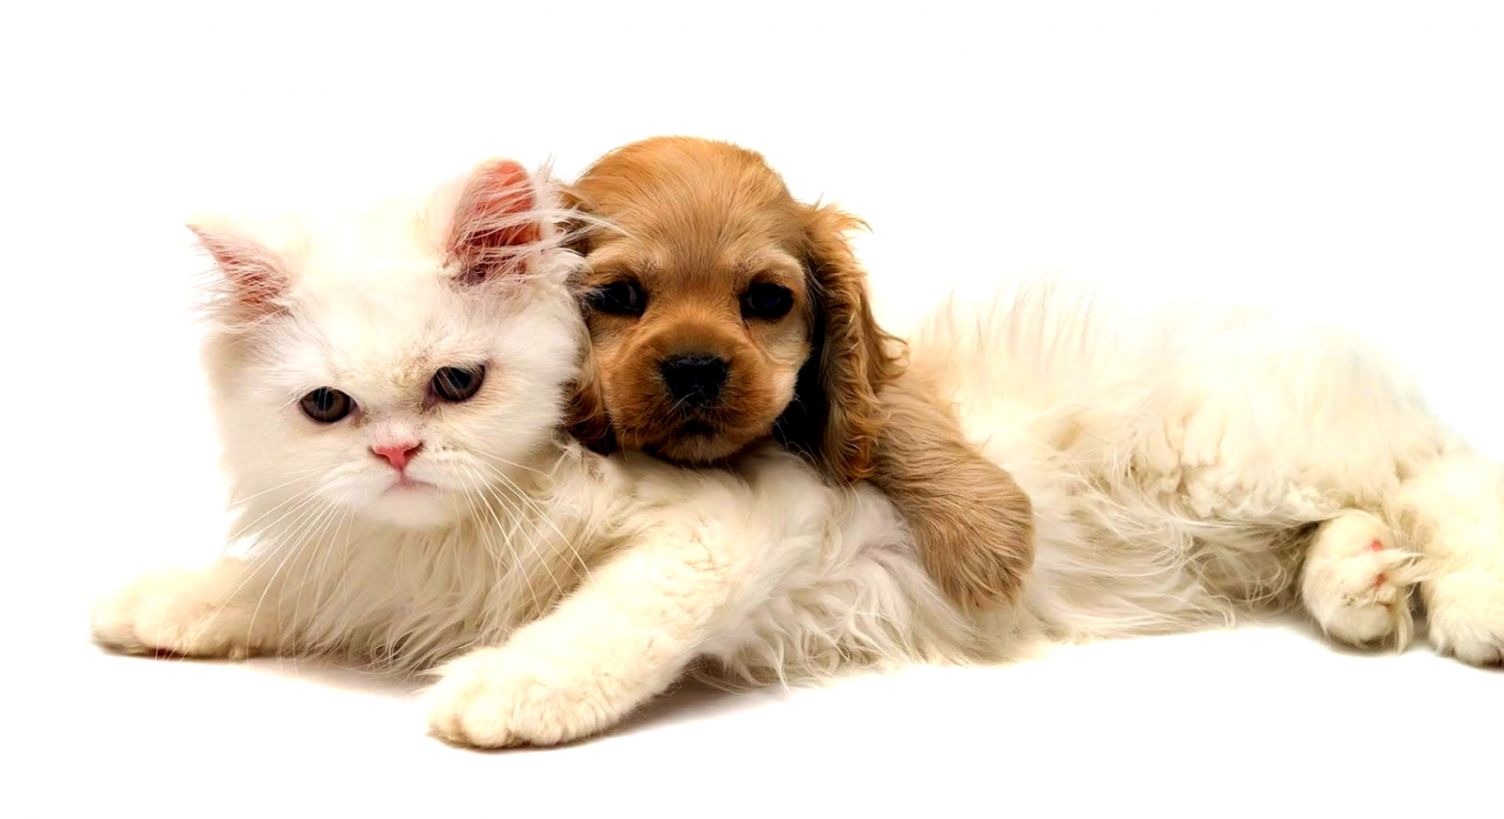 Cute Cat And Dog Wallpapers Hd